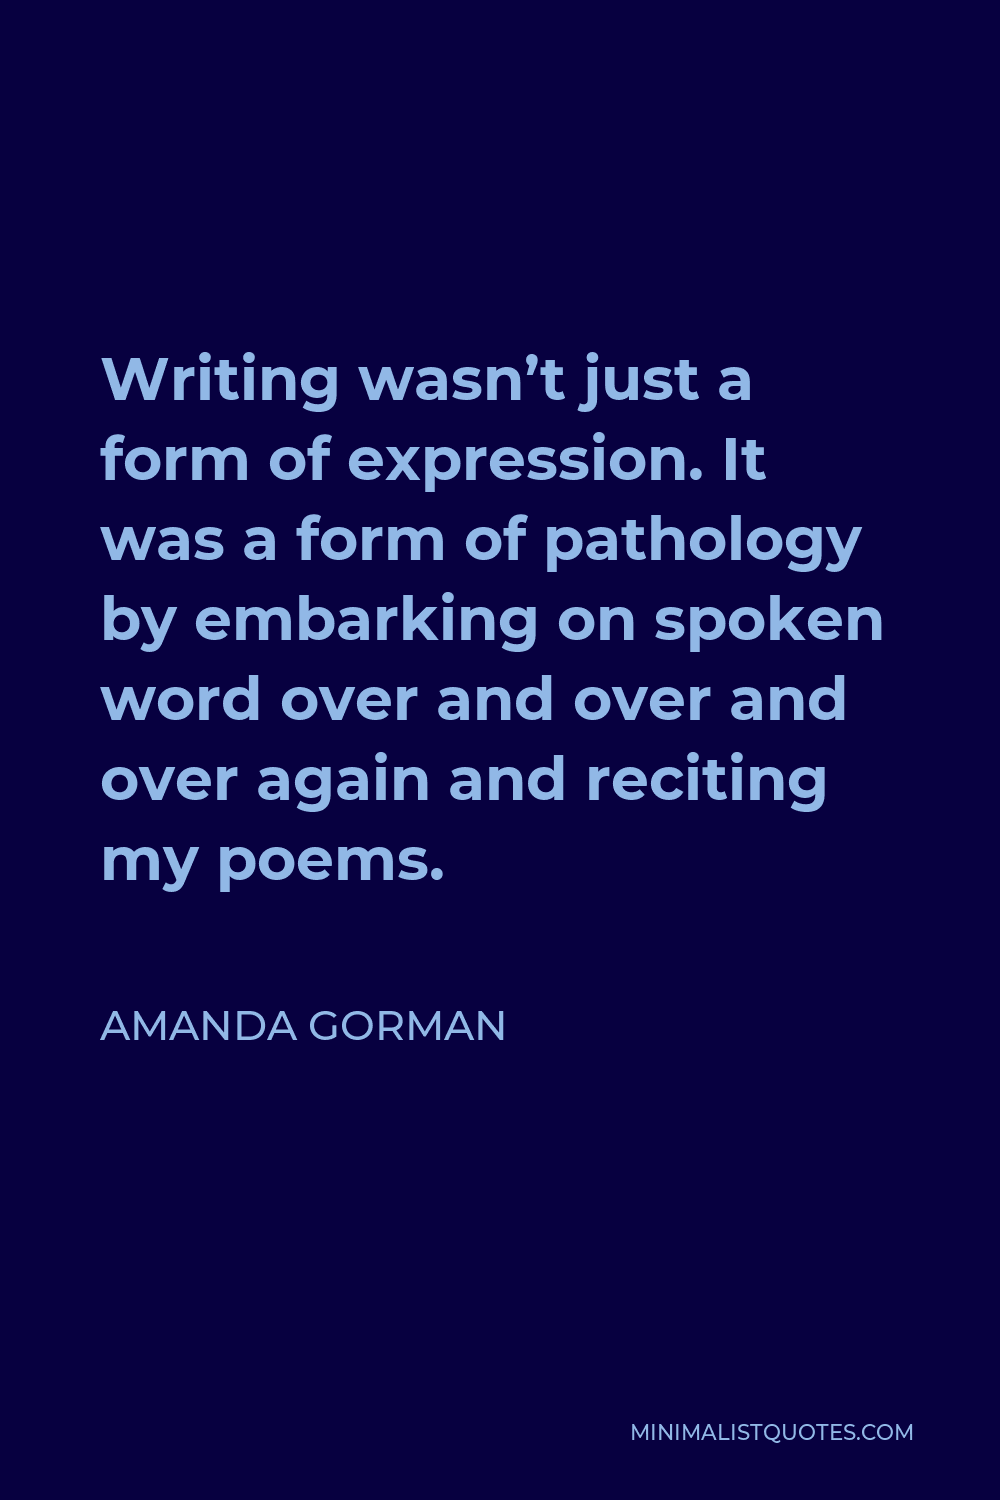 Amanda Gorman Quote - Writing wasn’t just a form of expression. It was a form of pathology by embarking on spoken word over and over and over again and reciting my poems.